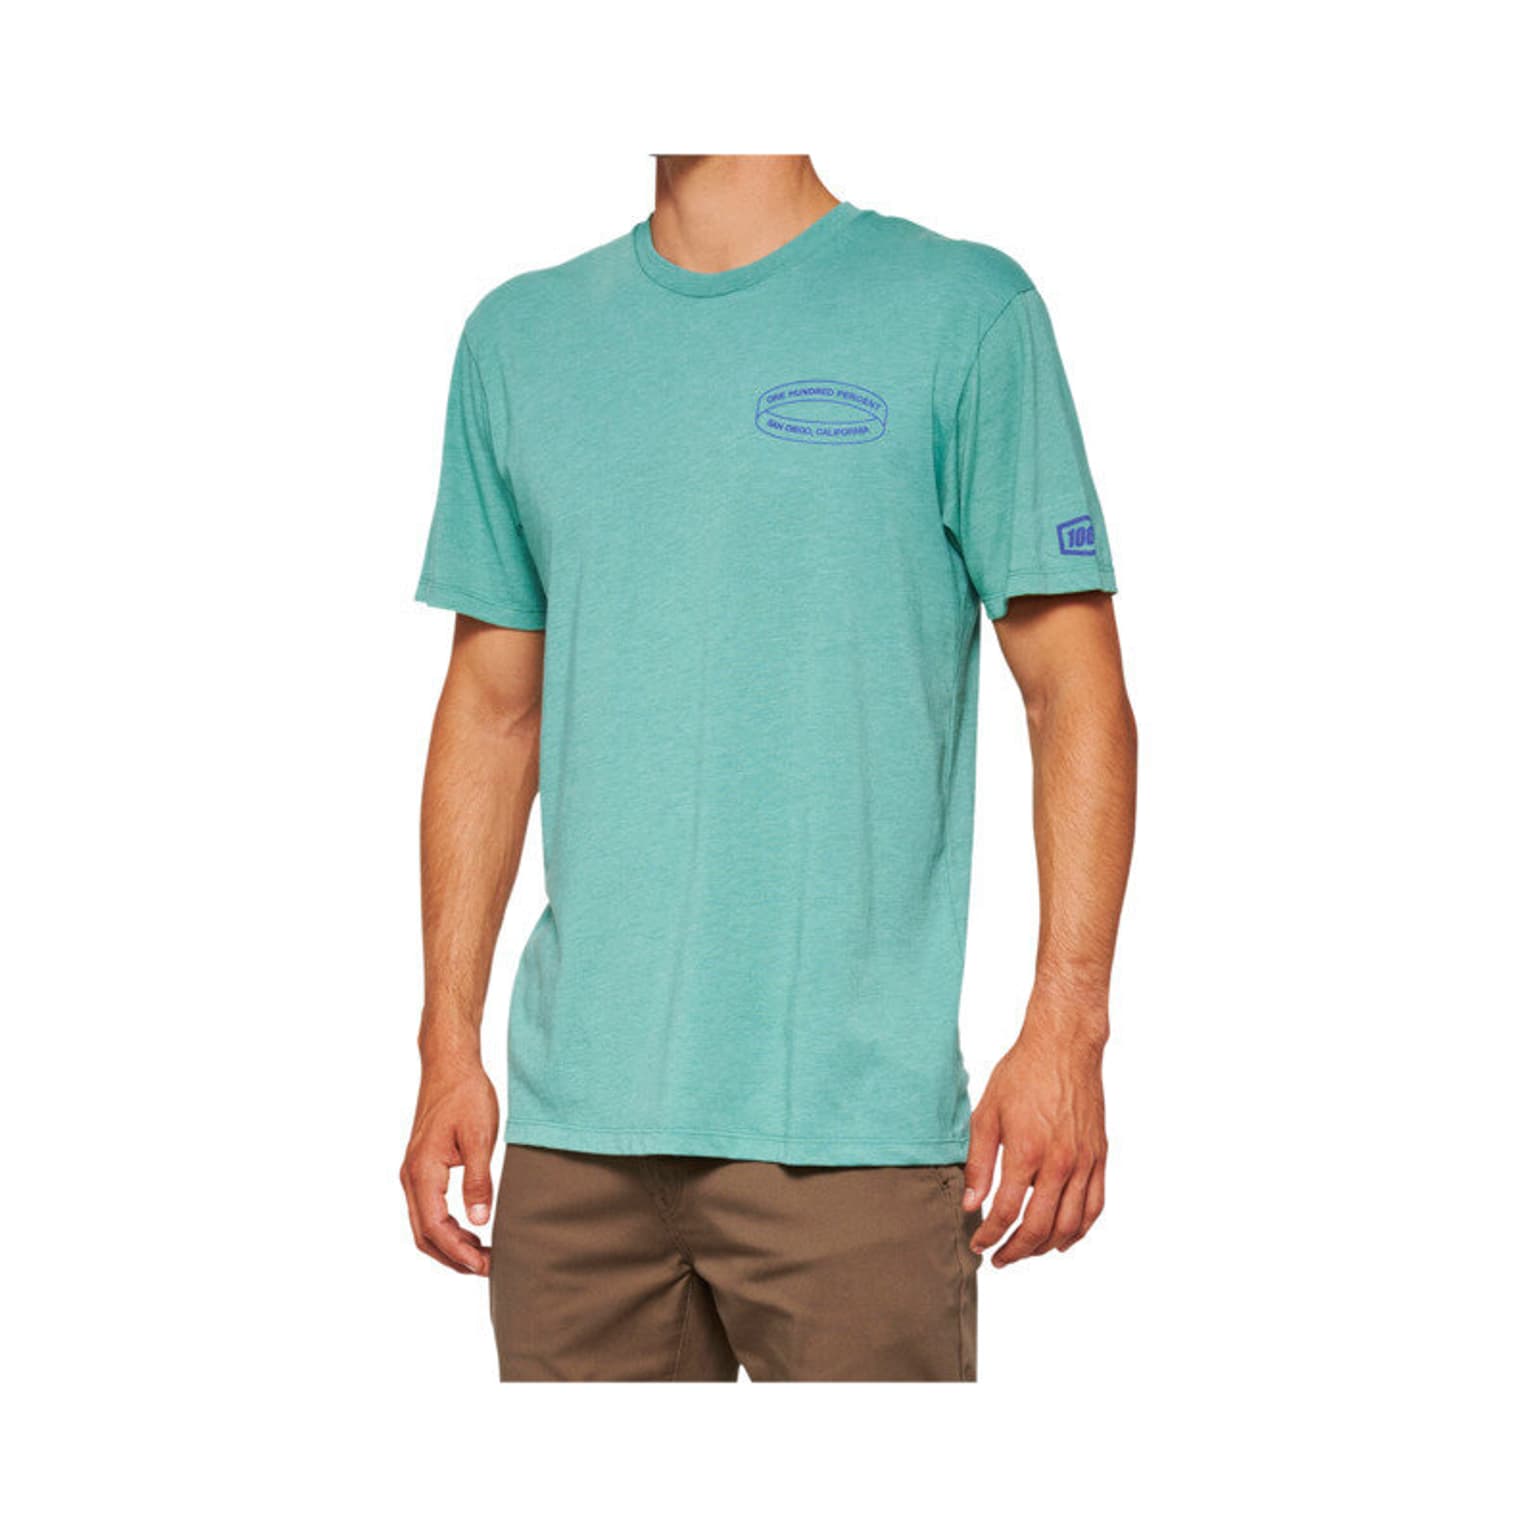 100% 100% Infinitee T-shirt turquoise-claire 1